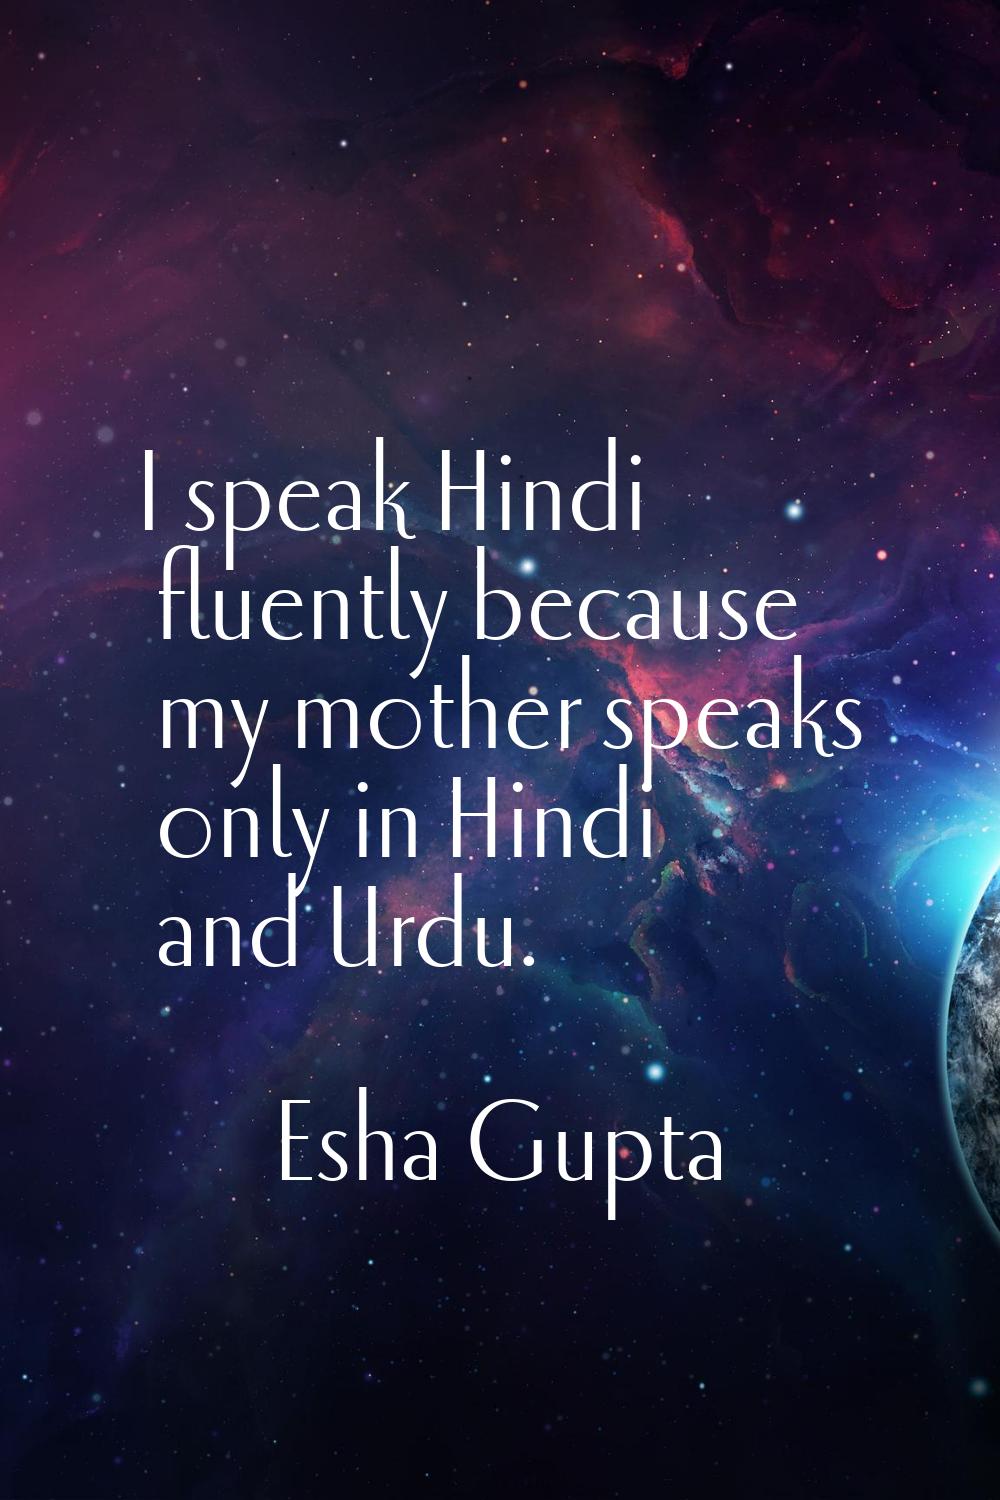 I speak Hindi fluently because my mother speaks only in Hindi and Urdu.